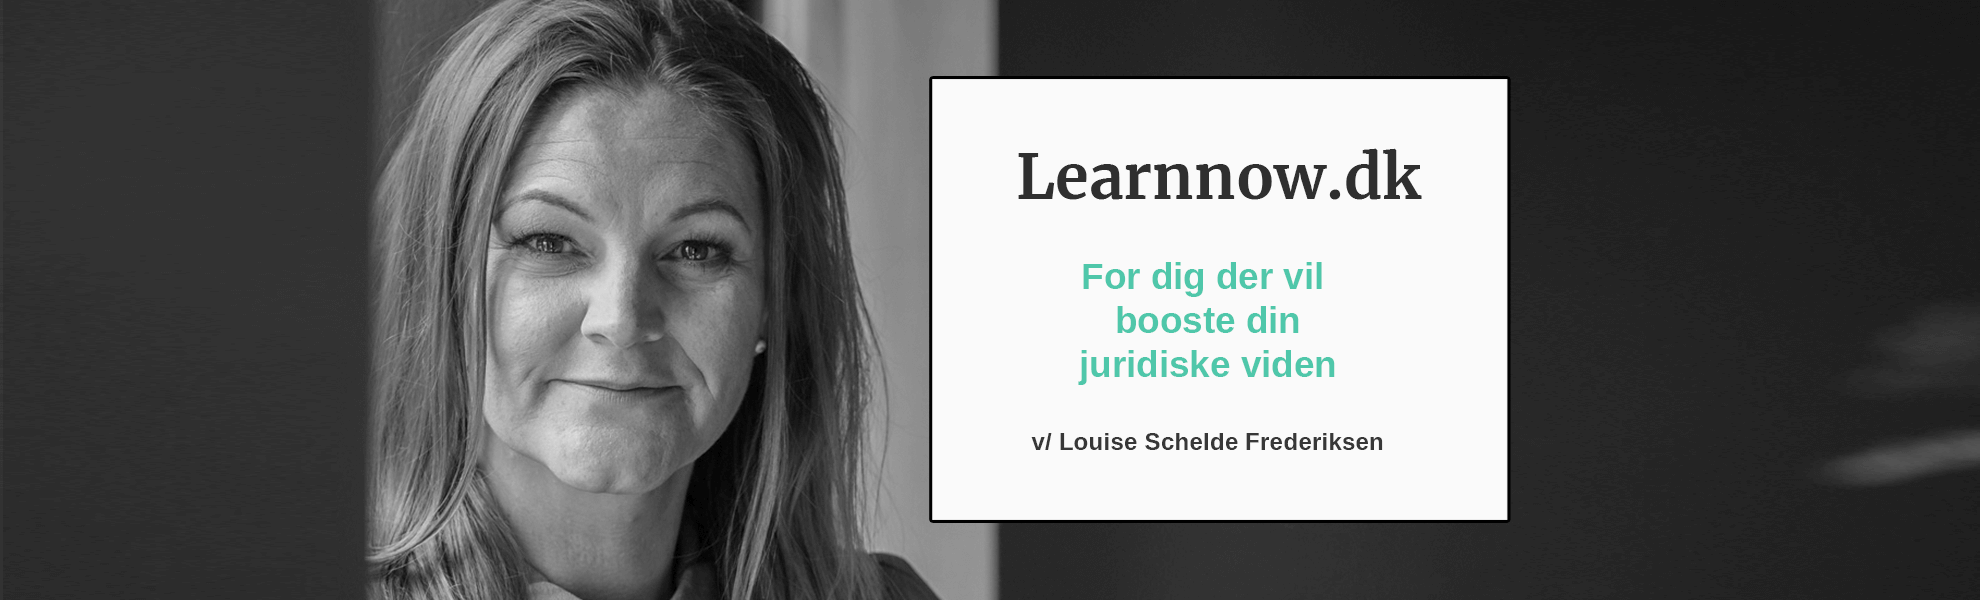 Learnnow.dk banner